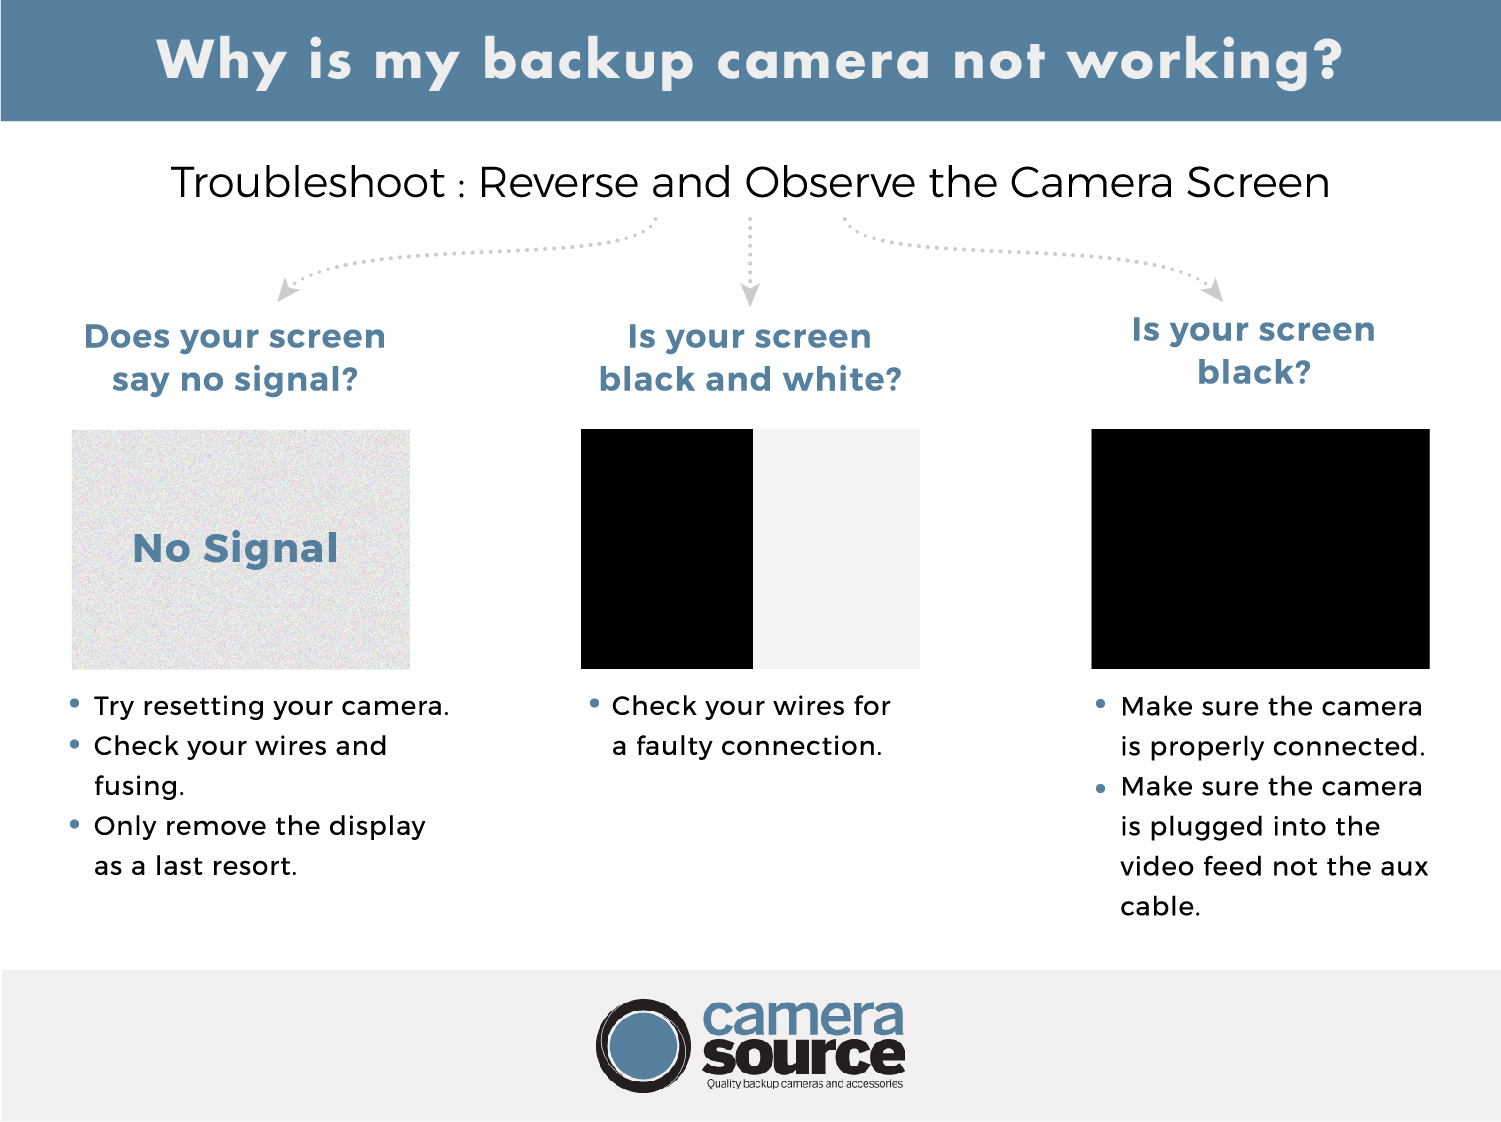 If your backup camera screen says no signal or shows a blurry black and white image, you may need to do some more troubleshooting to figure out your issue.